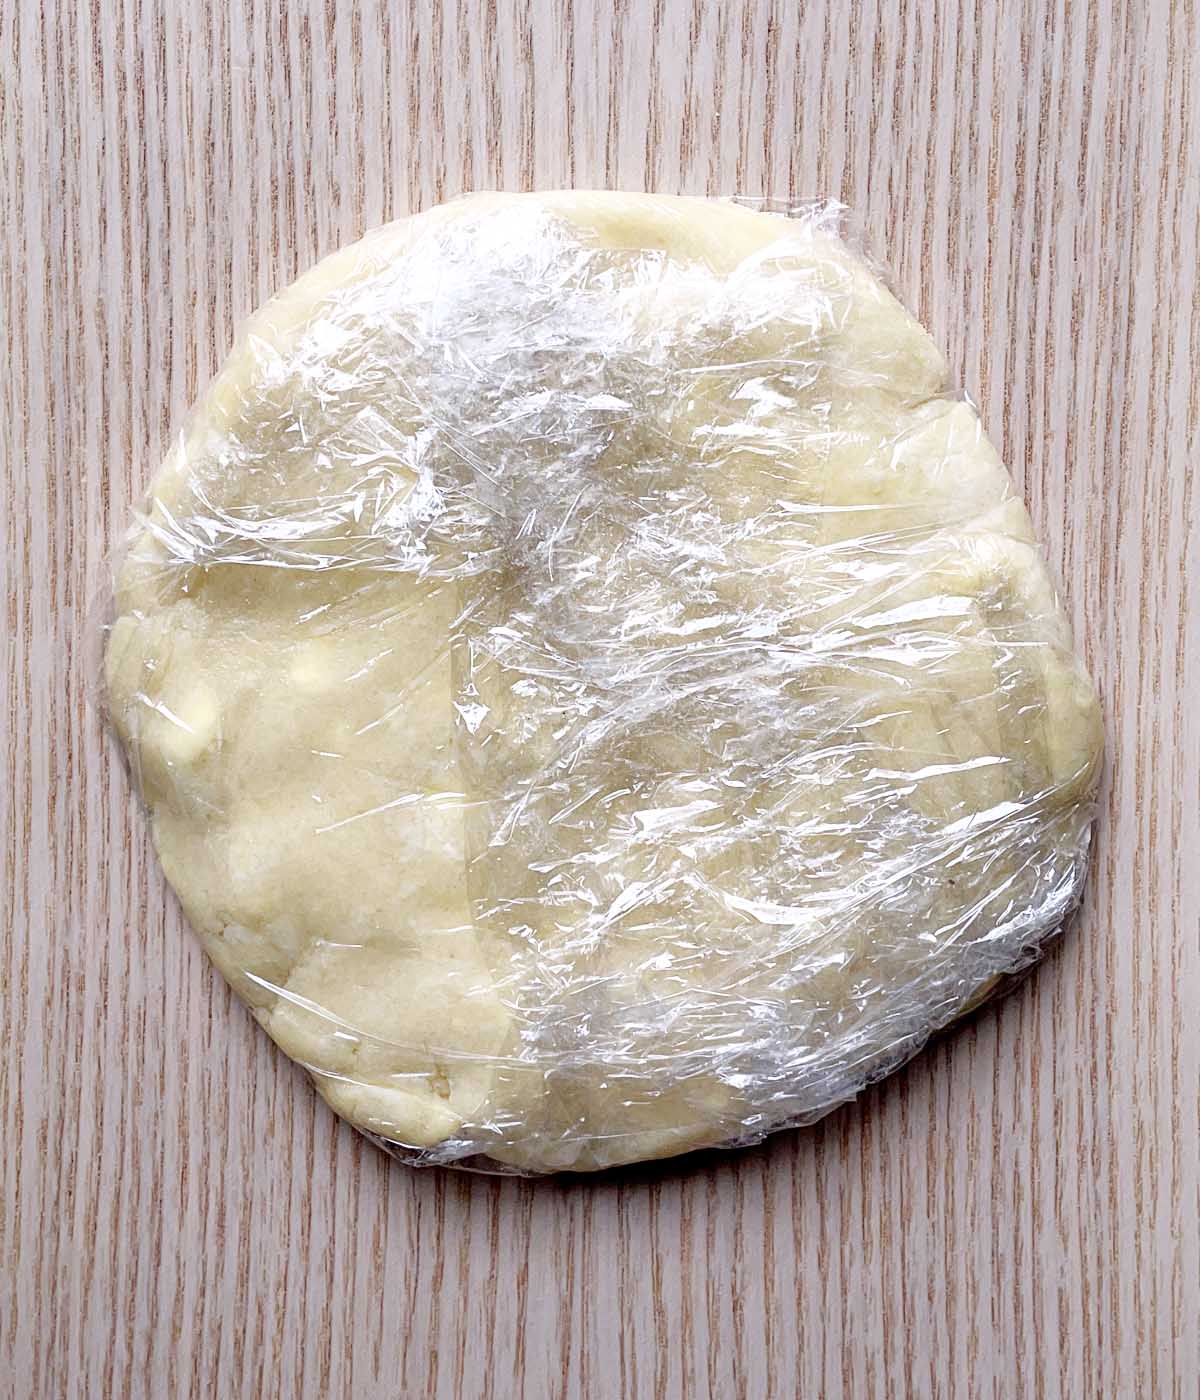 A round disc of dough wrapped in clear plastic wrap.